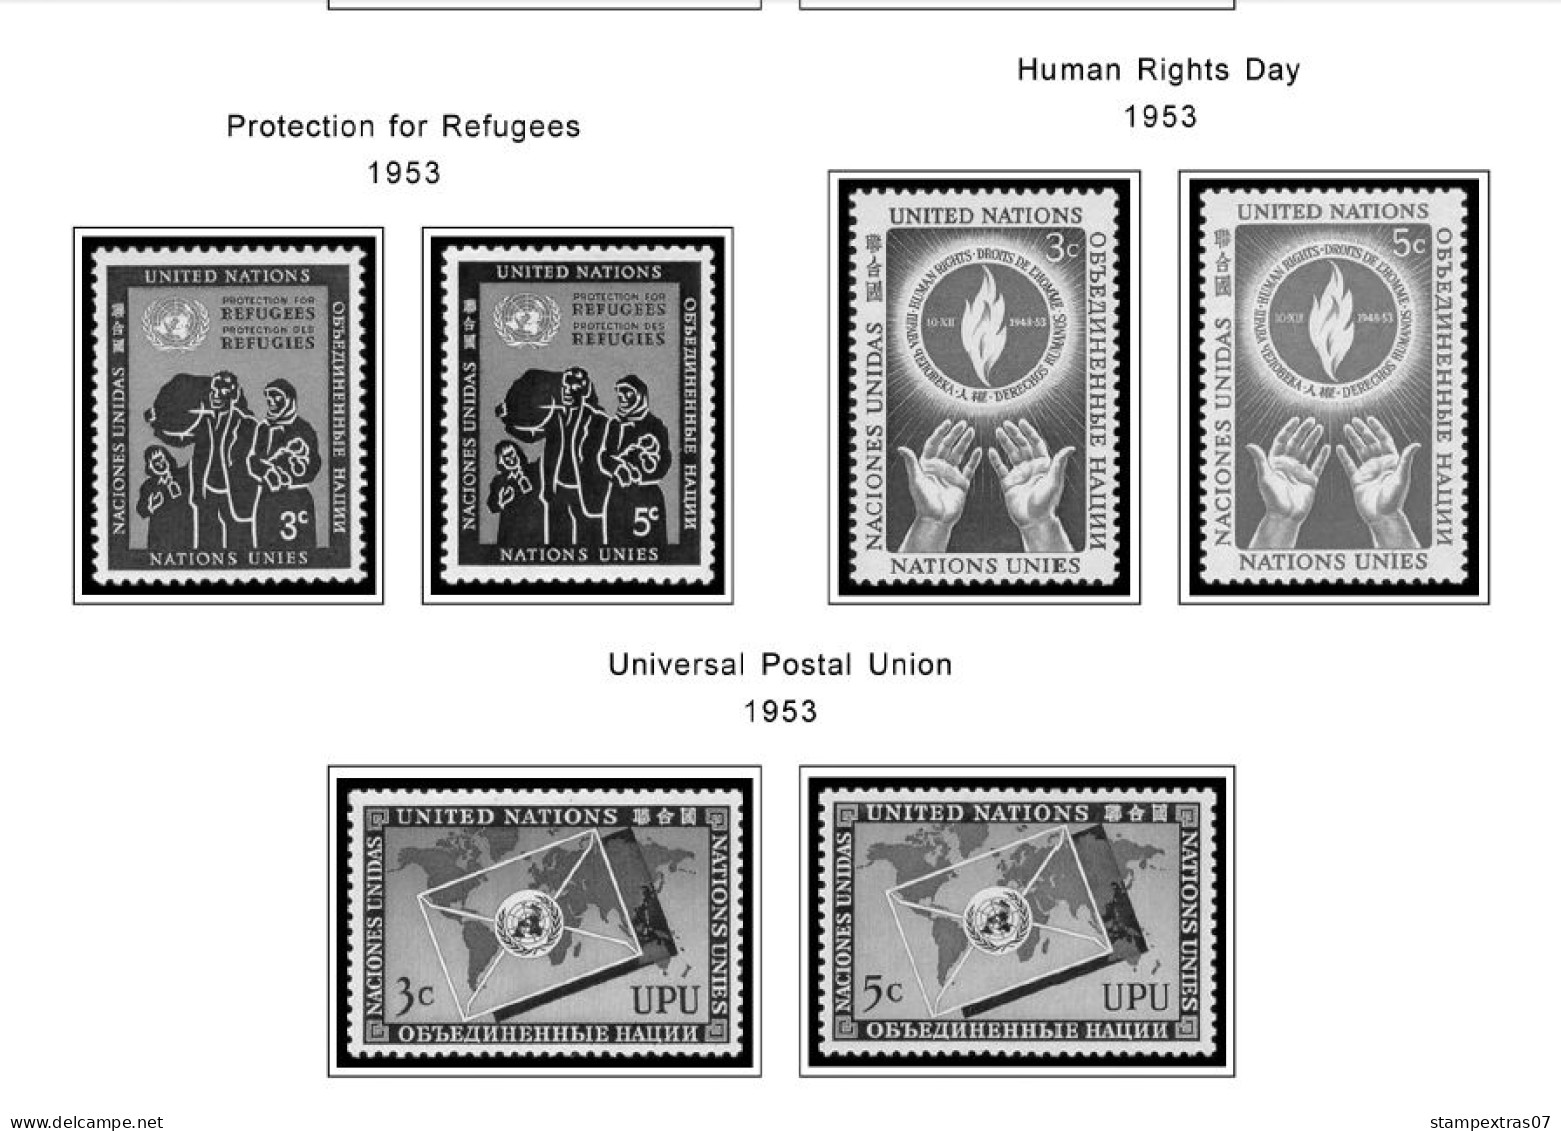 UNITED NATIONS - NEW YORK 1951-2020 STAMP ALBUM PAGES (229 B&w Illustrated Pages) - Inglés